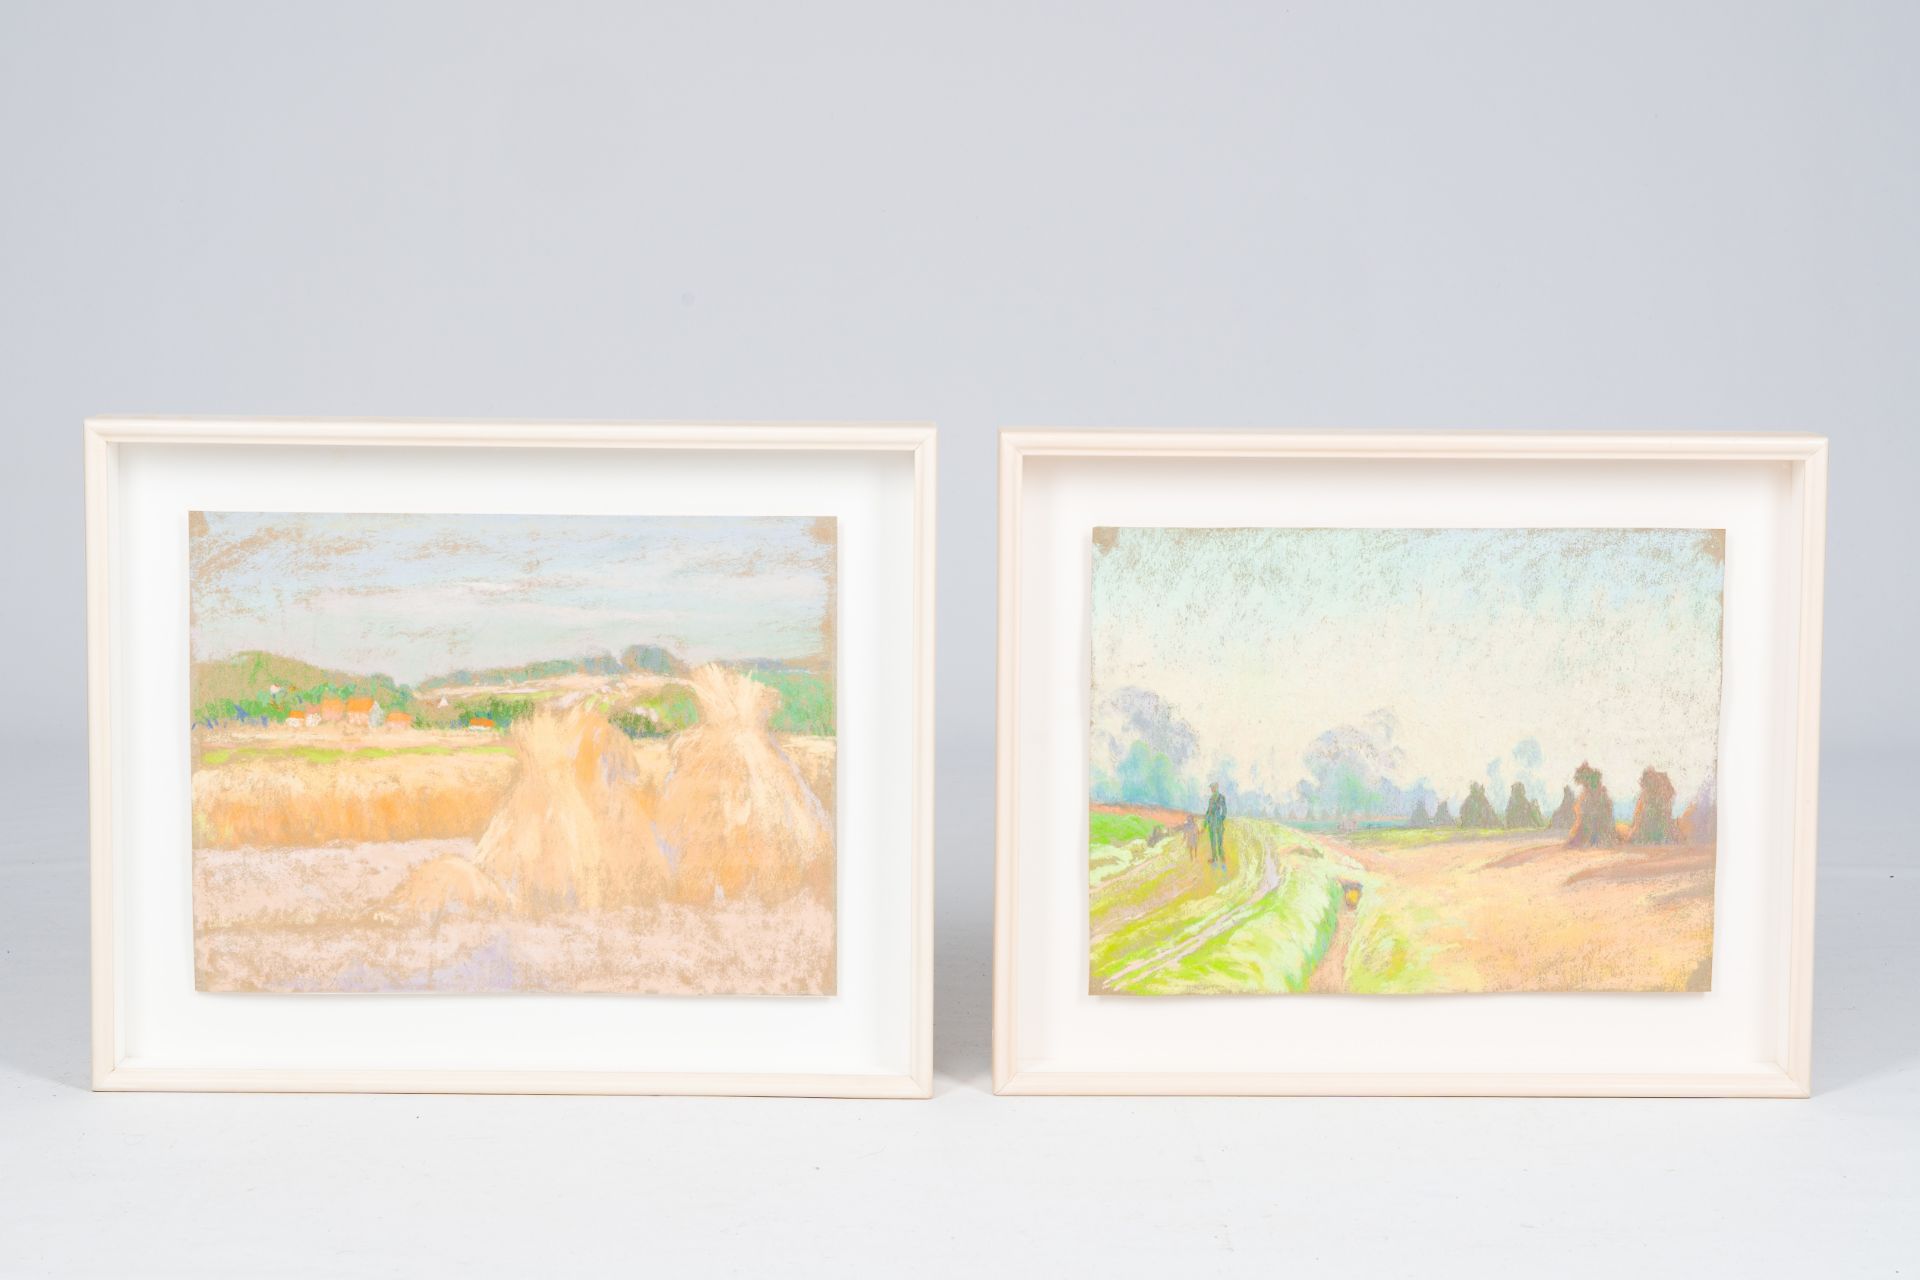 Rodolphe De Saegher (1871-1941): Two landscapes with haystacks, pastel on paper, one dated 1923